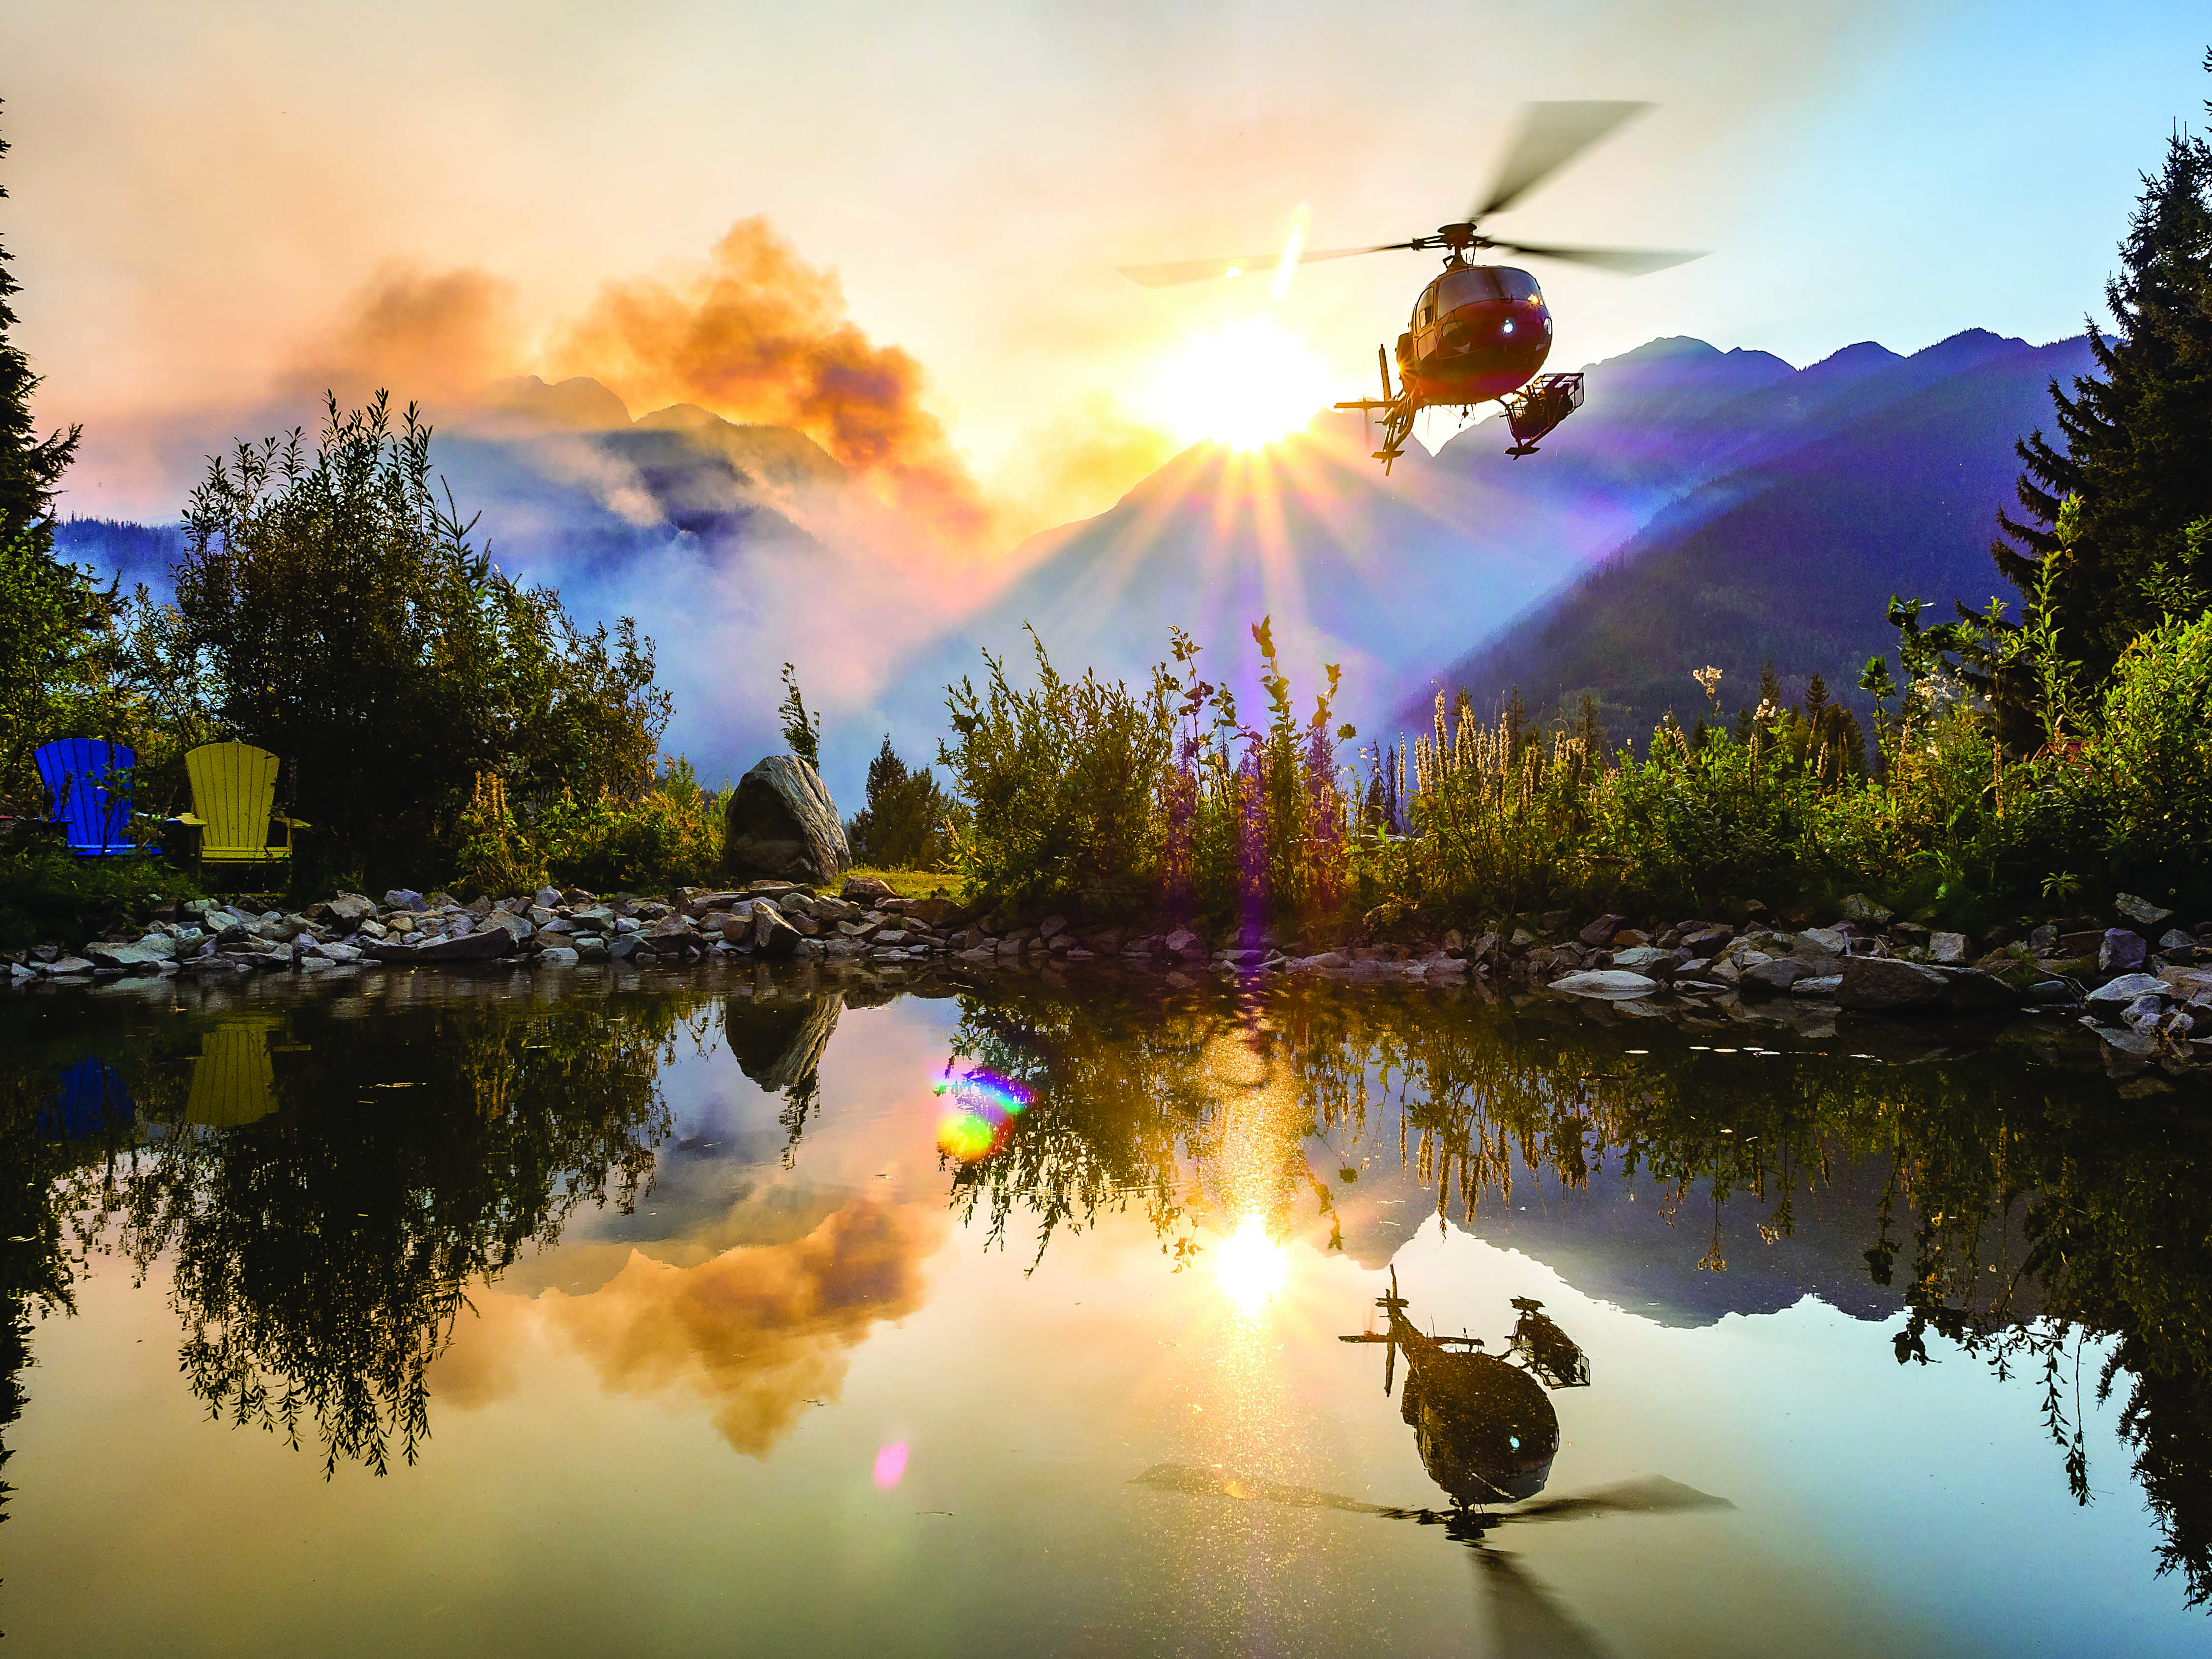 Maur Mere’s grand-prize-winning photo of an Airbus AS350 AStar perfectly reflected in a still mountain pond as it takes off to begin firefighting operations in British Columbia. Maur Mere Photo